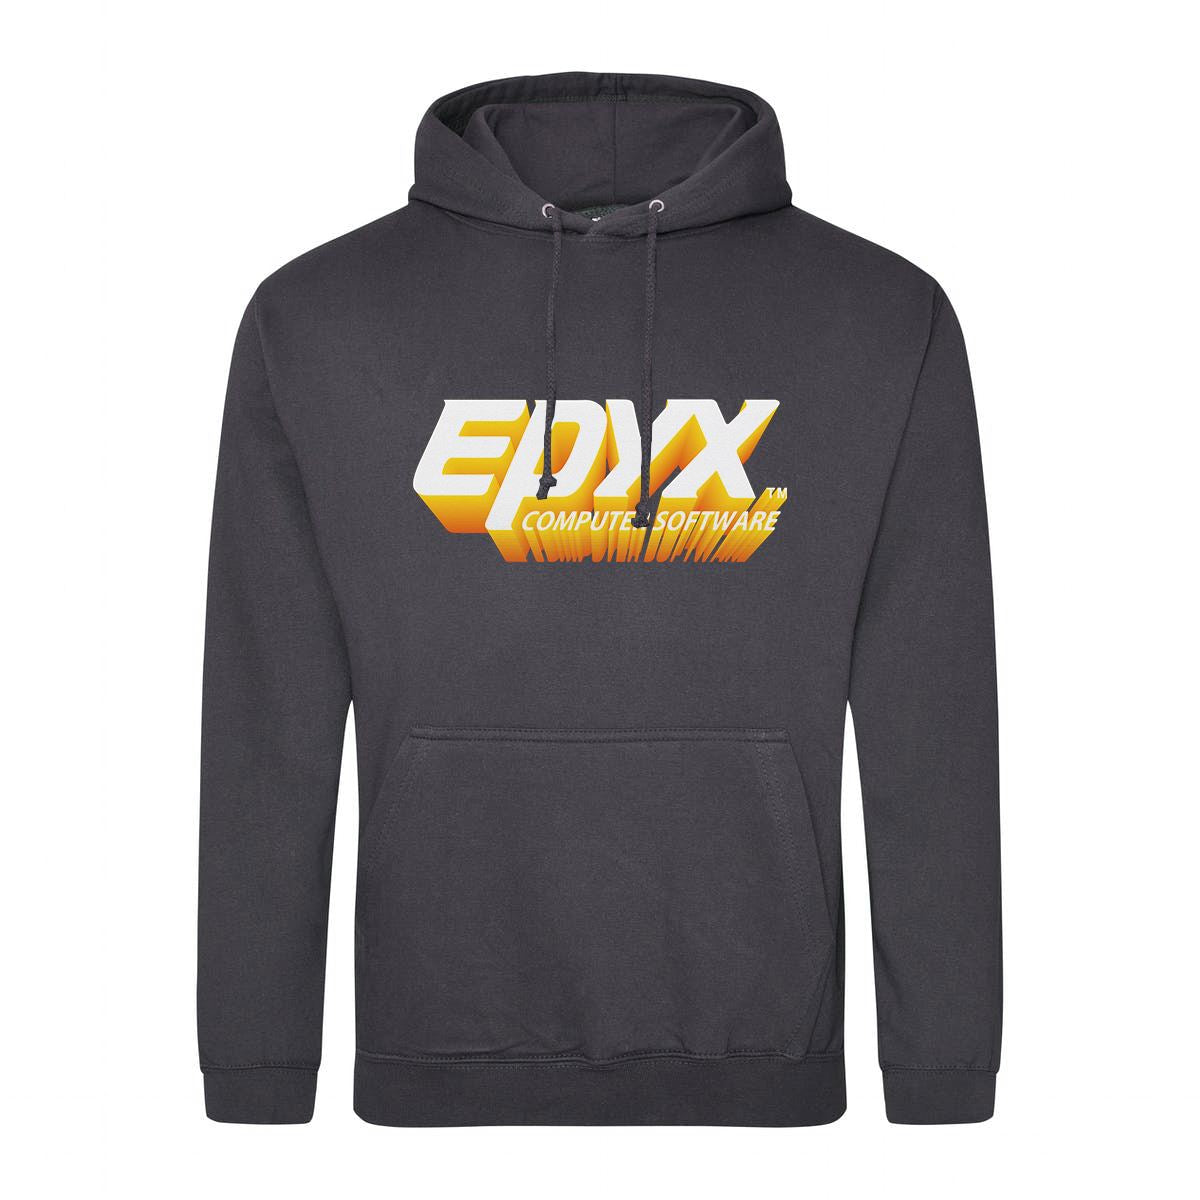 Epyx Computer Software Retro Gaming Hoodie Hoodie Seven Squared Small 36" Chest Storm Grey 